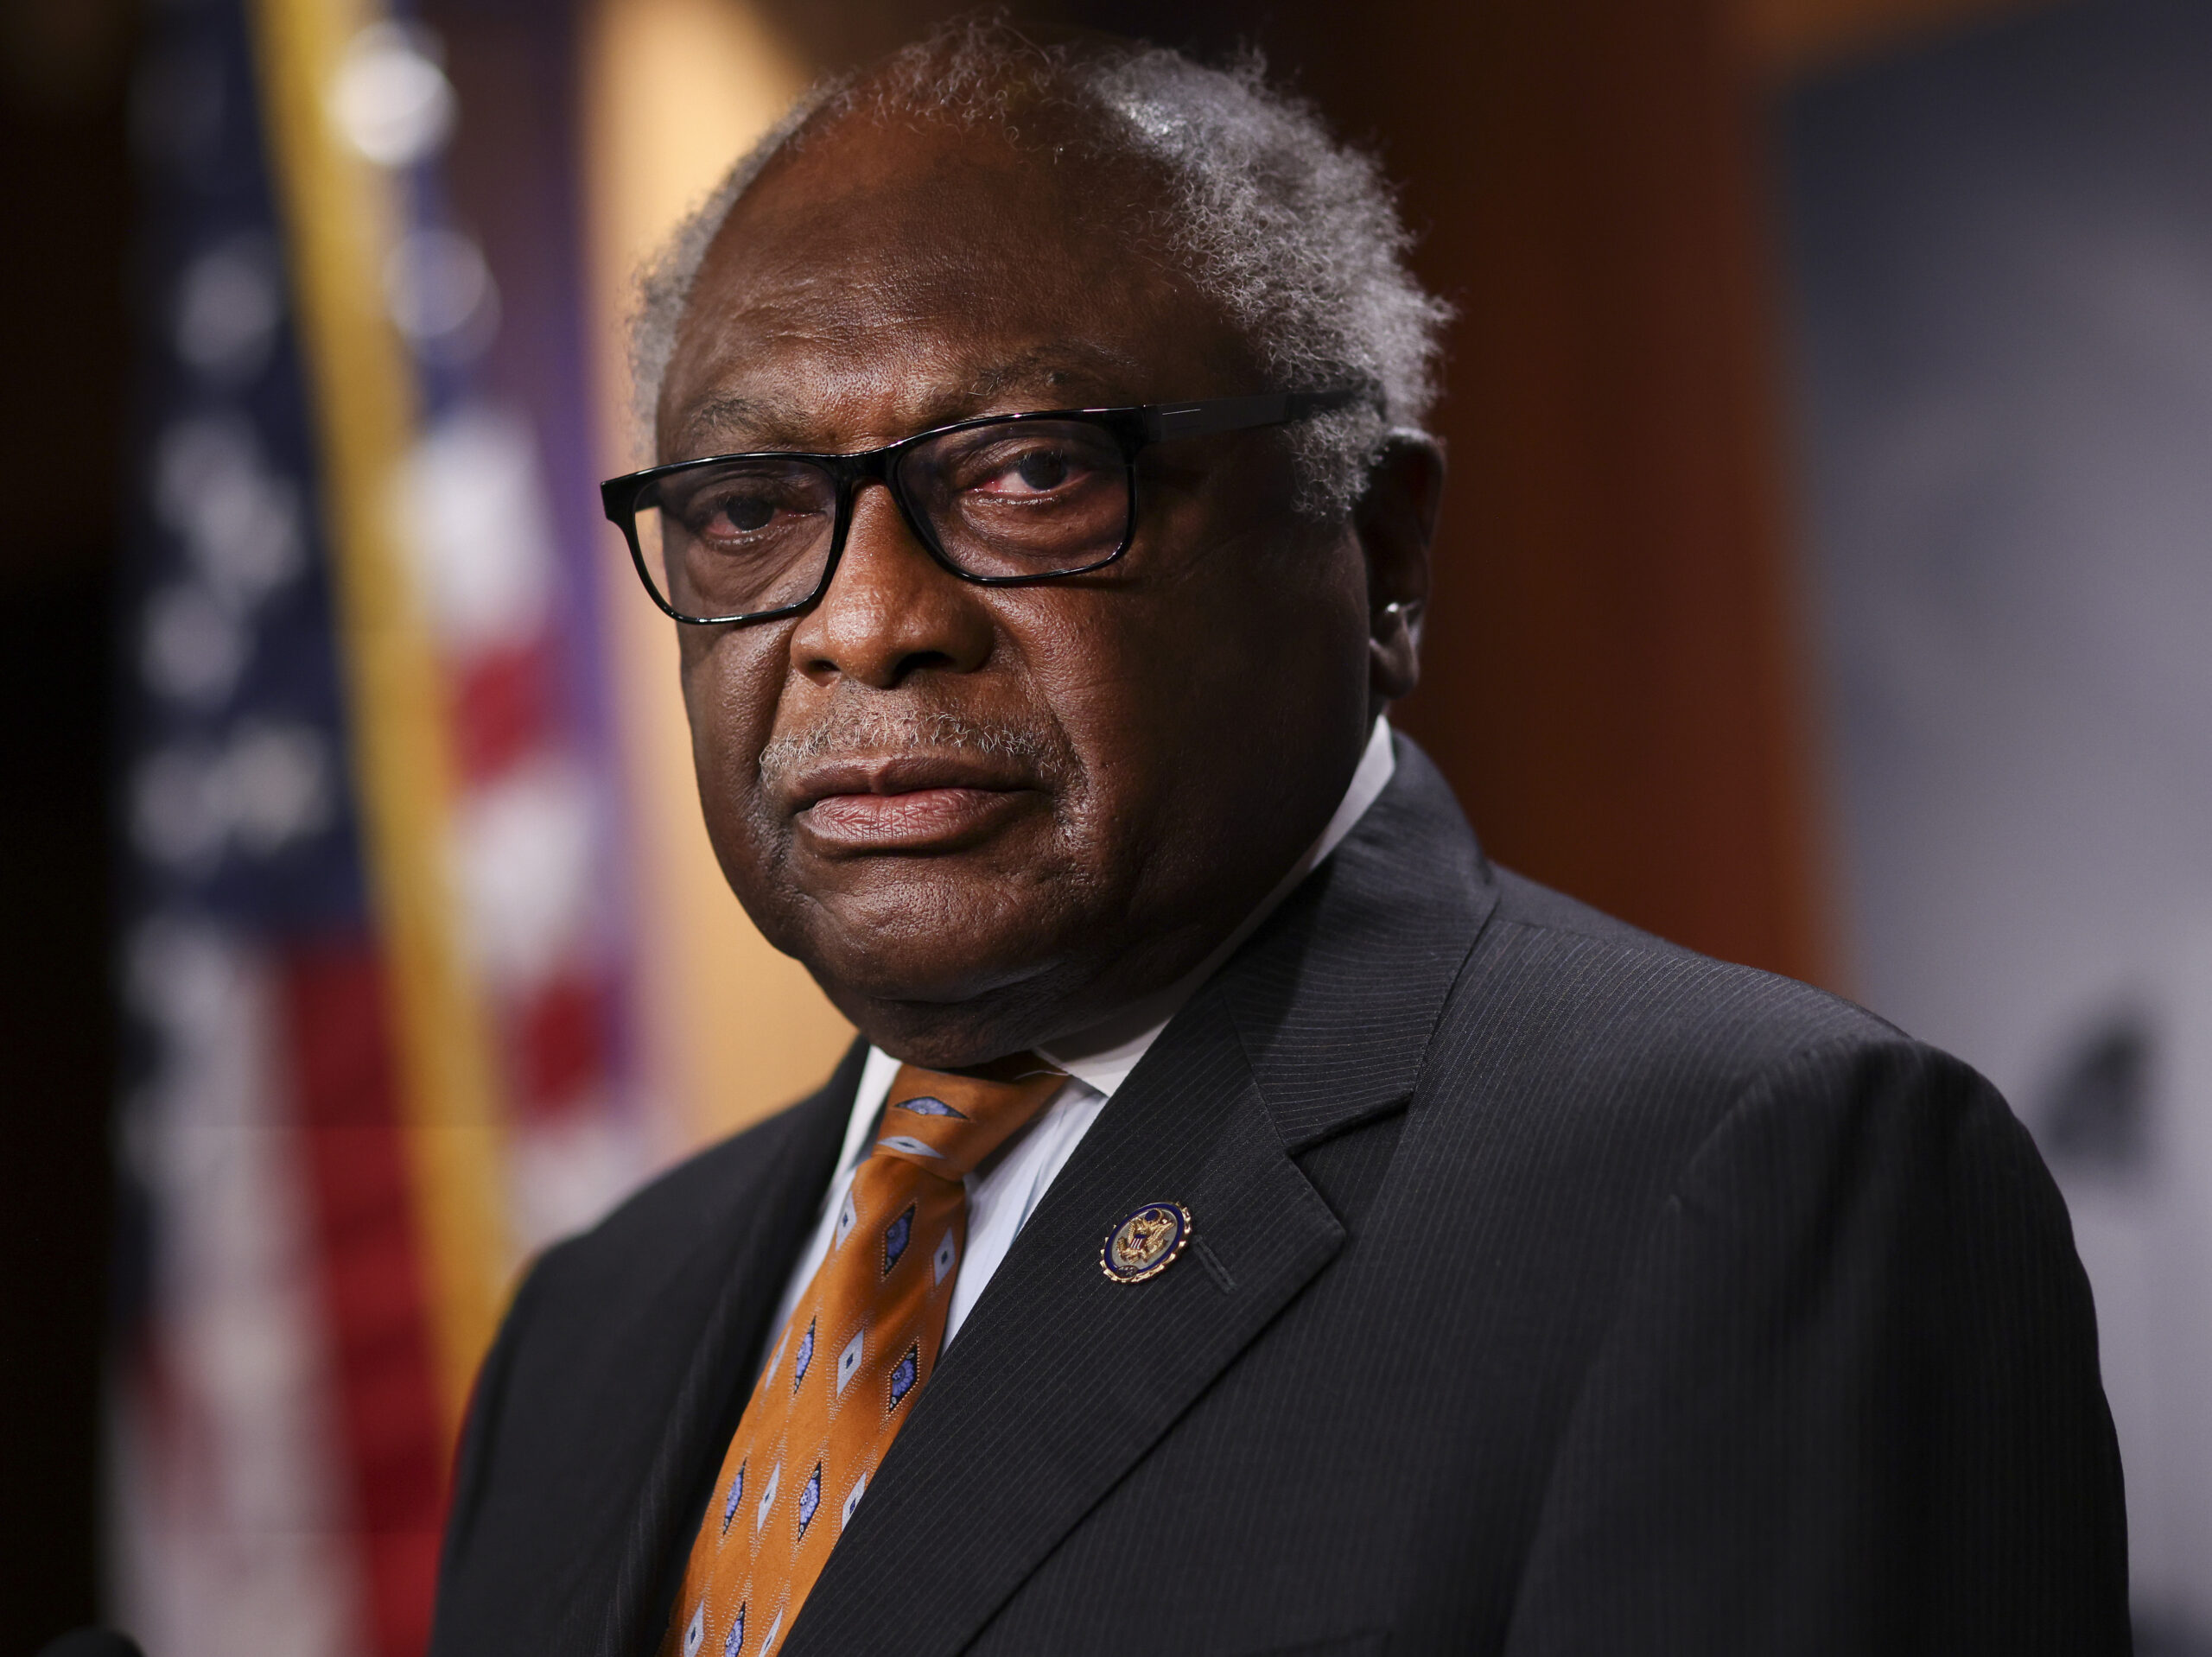 Rep. Jim Clyburn on the future of the Democratic Party and his legacy